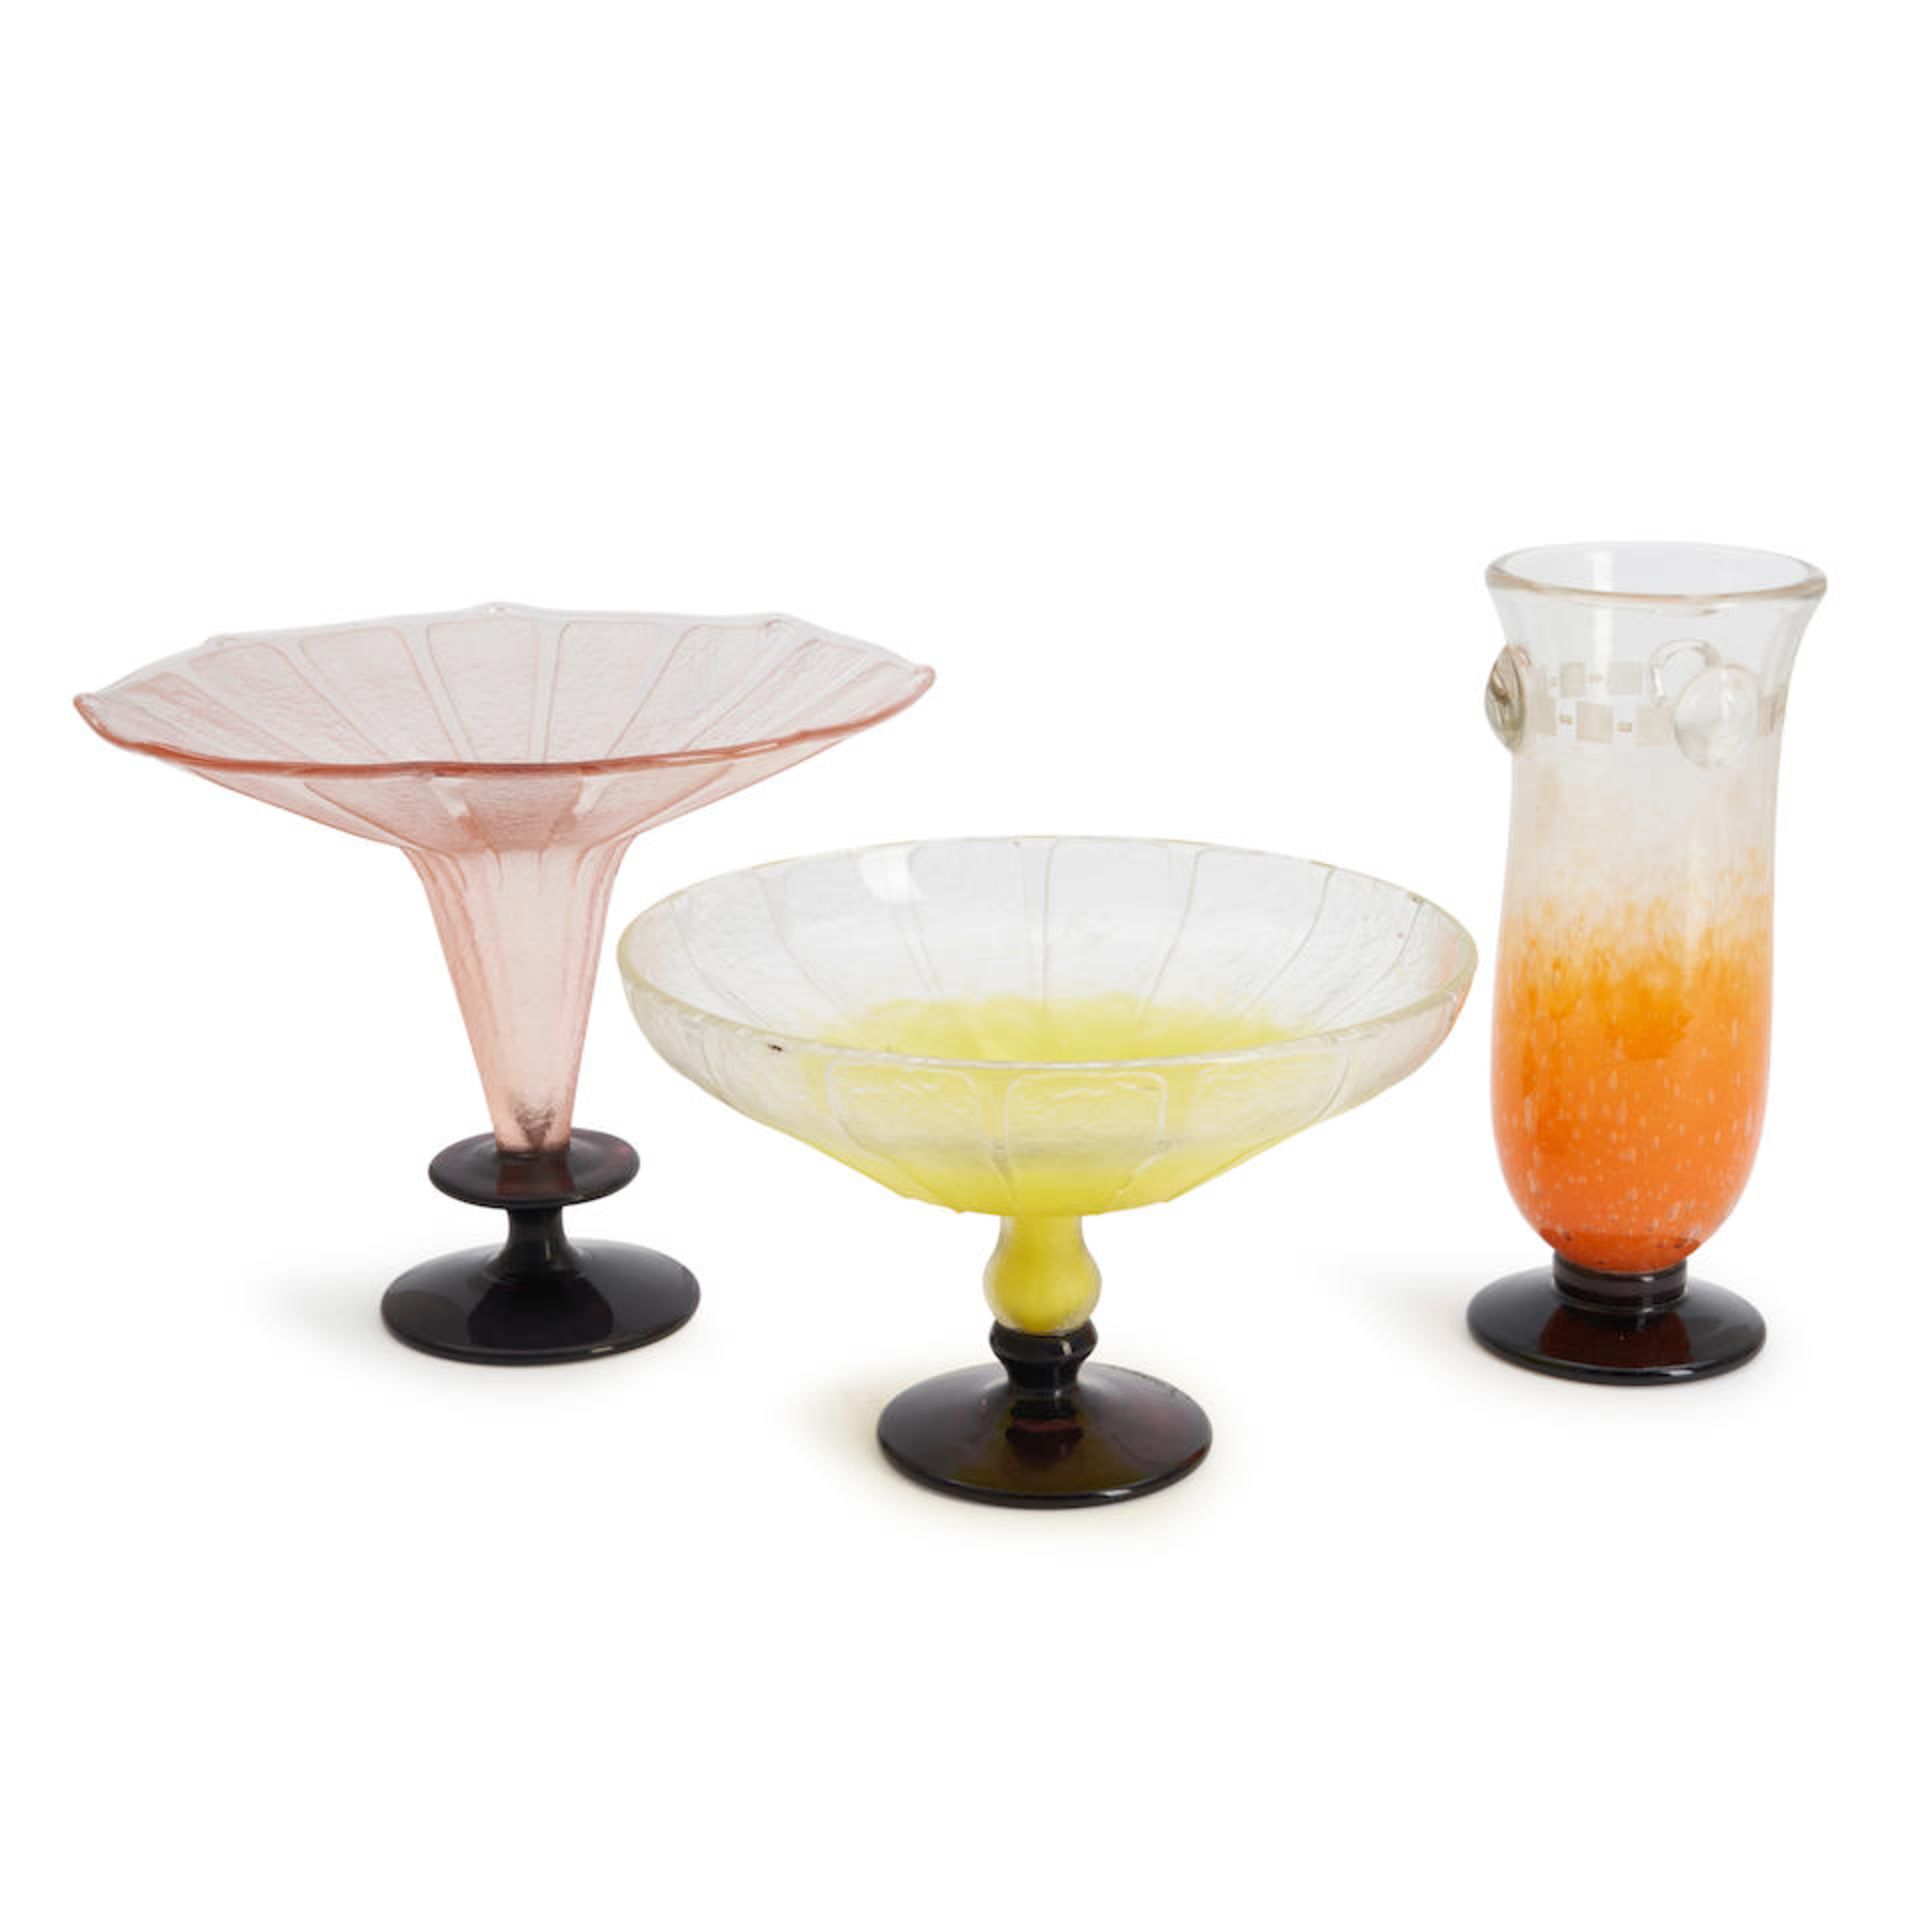 THREE CHARLES SCHNEIDER LE VERRE FRANCAIS GLASS ITEMS, France, c. 1925, all with acid-etched mar...